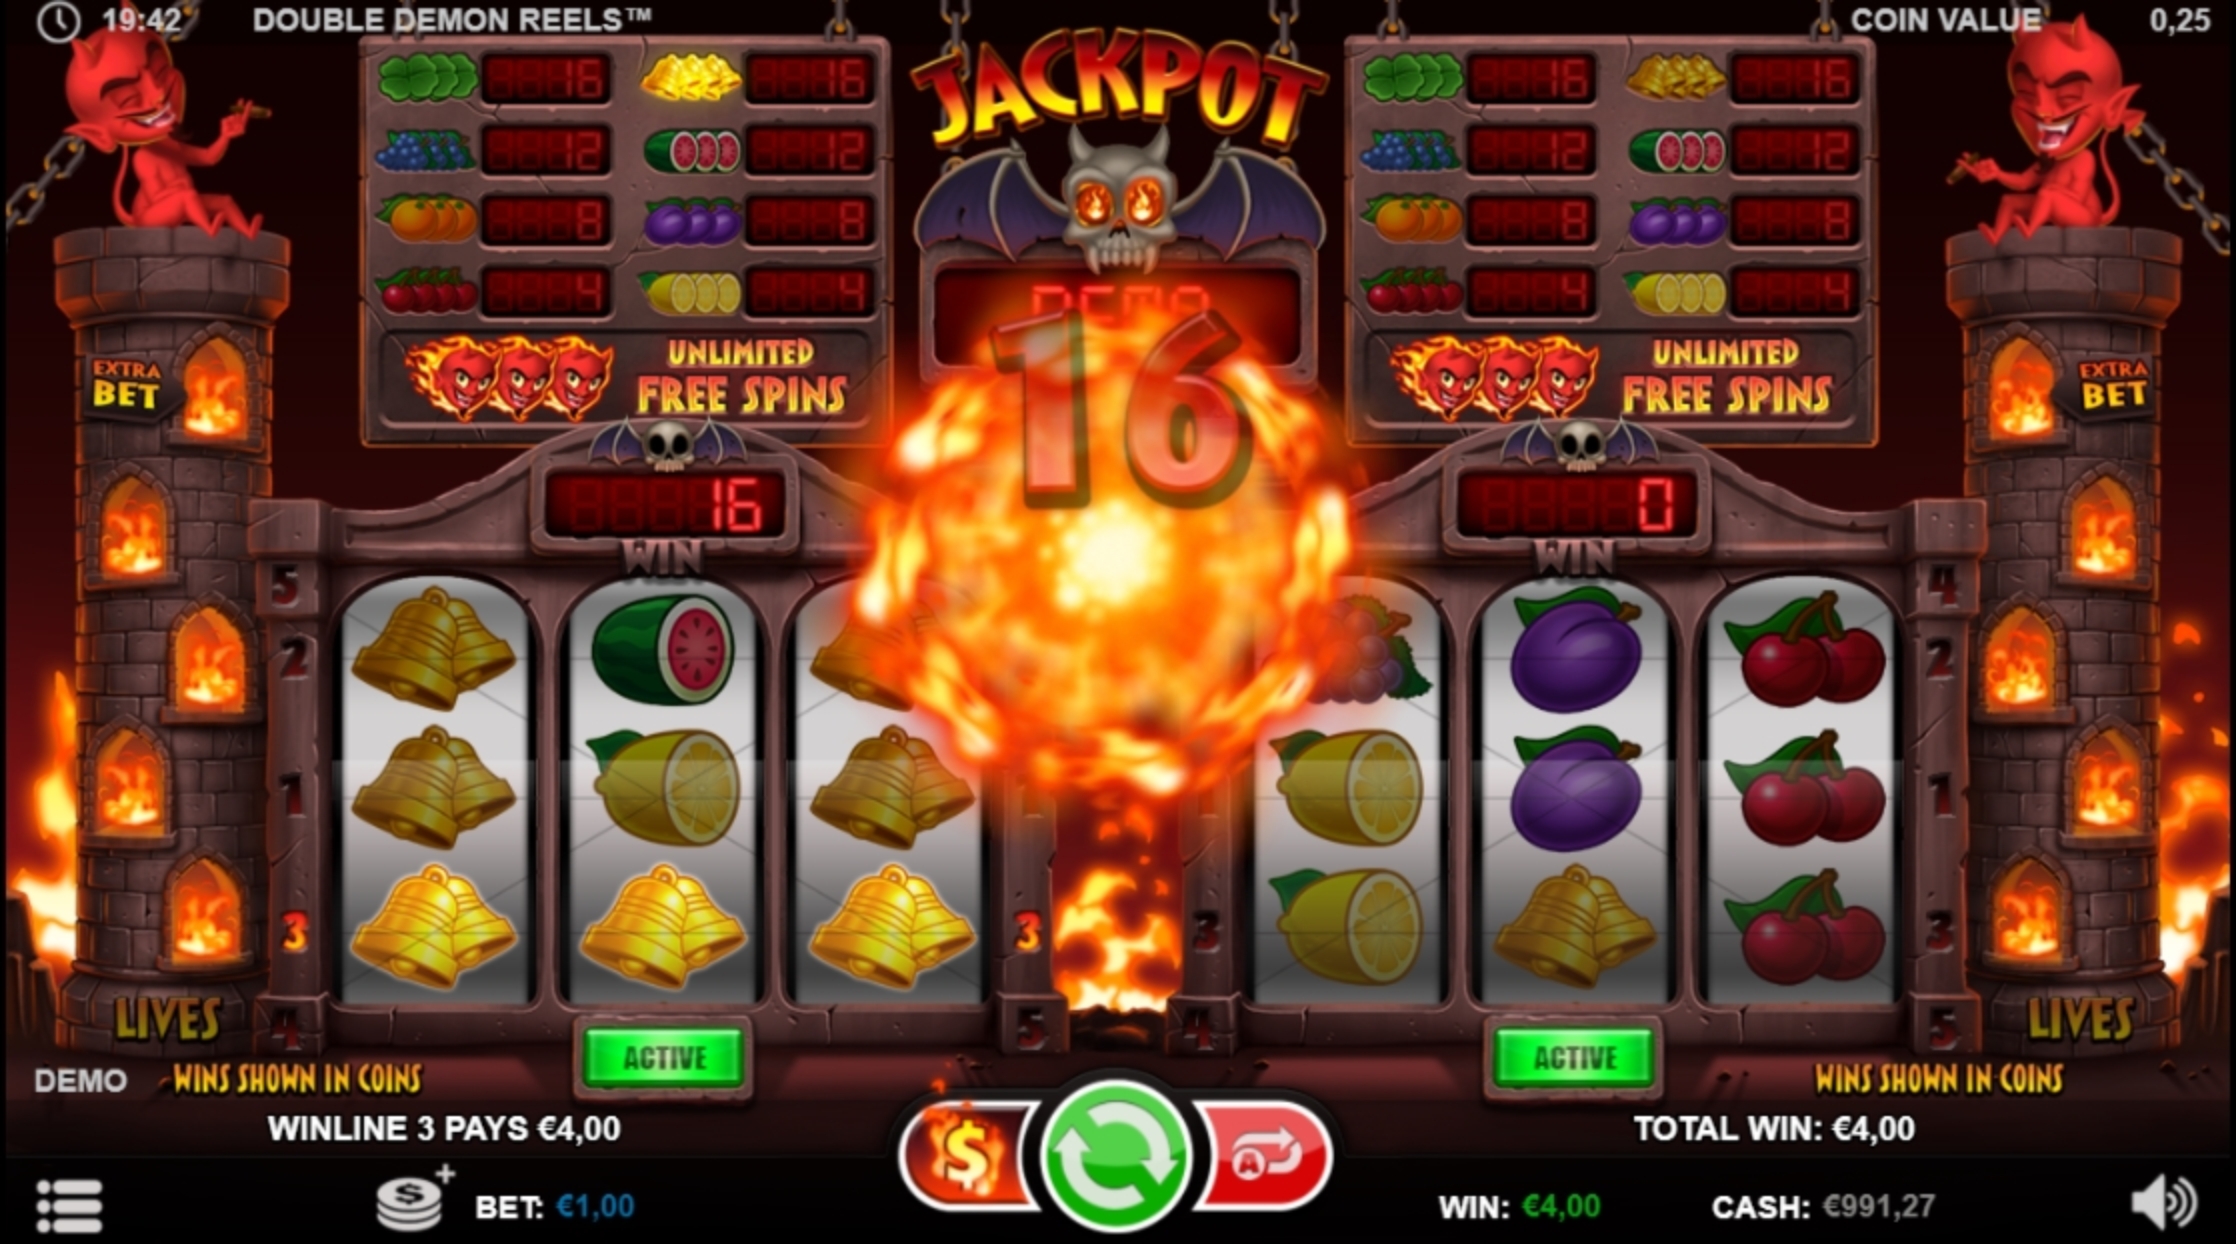 Win Money in Double Demon Reels Free Slot Game by Betsson Group